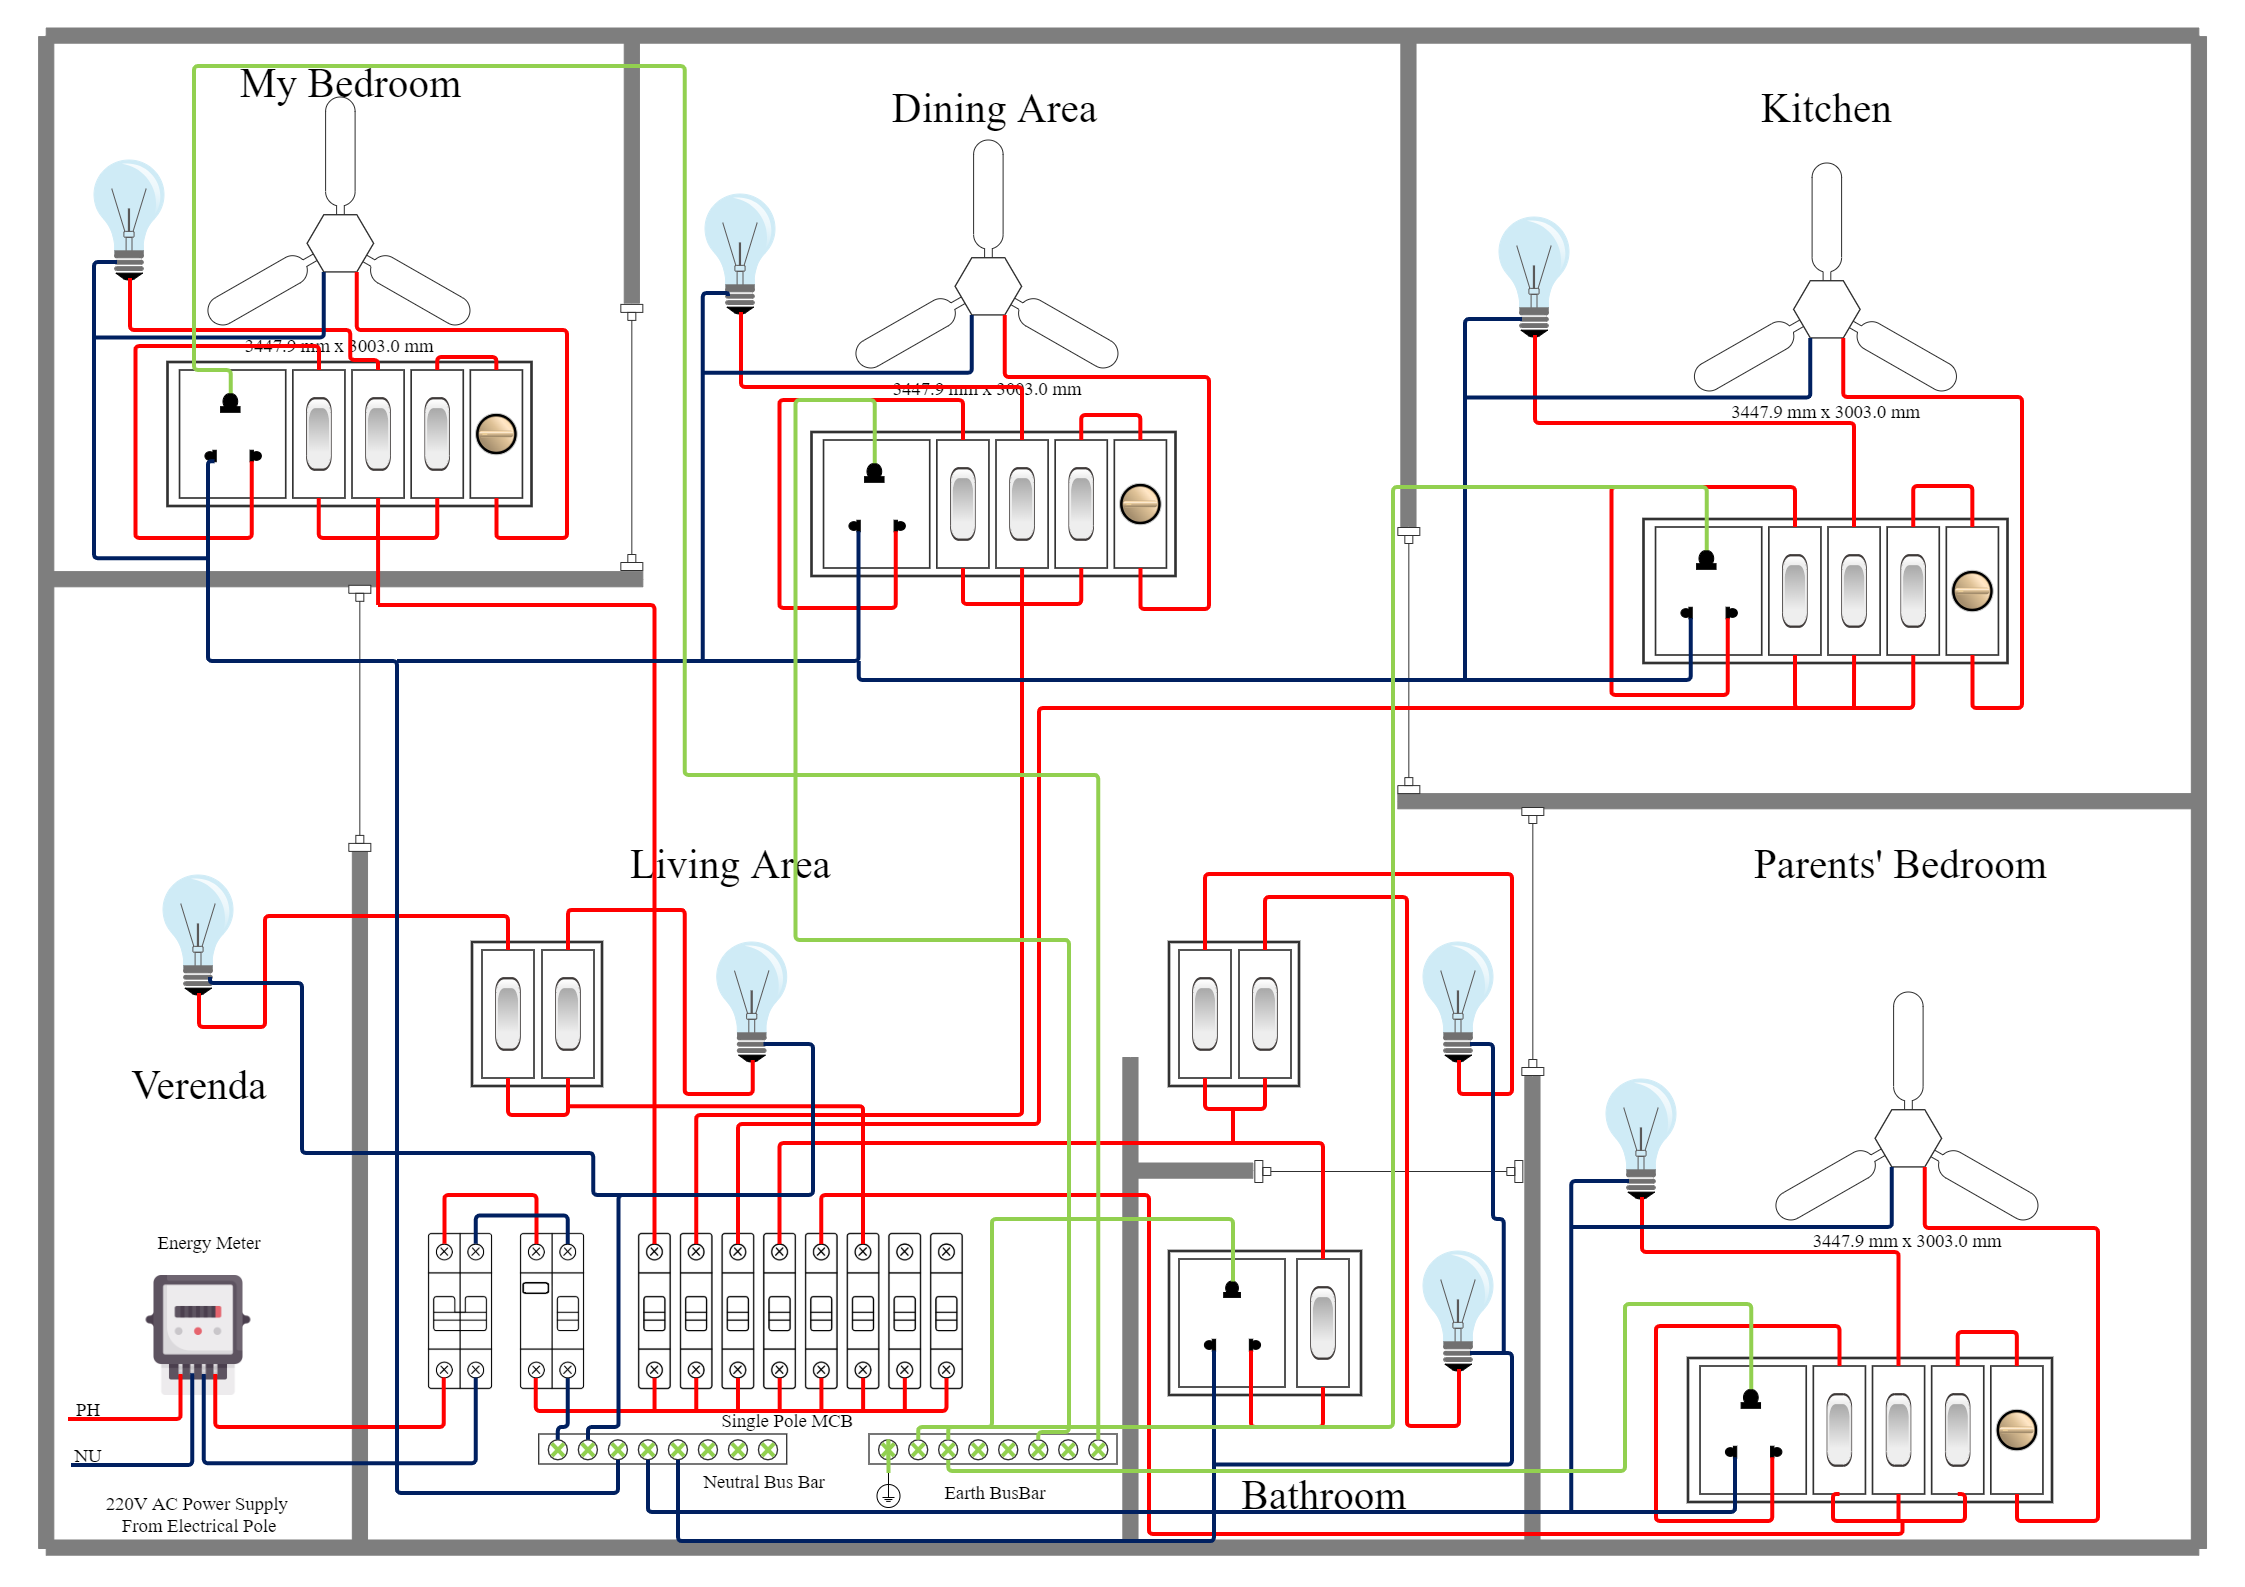 Electrical diagrams are drawings that are used to illustrate electrical circuits. These circuits are portrayed by utilizing lines, symbols, and number combinations.